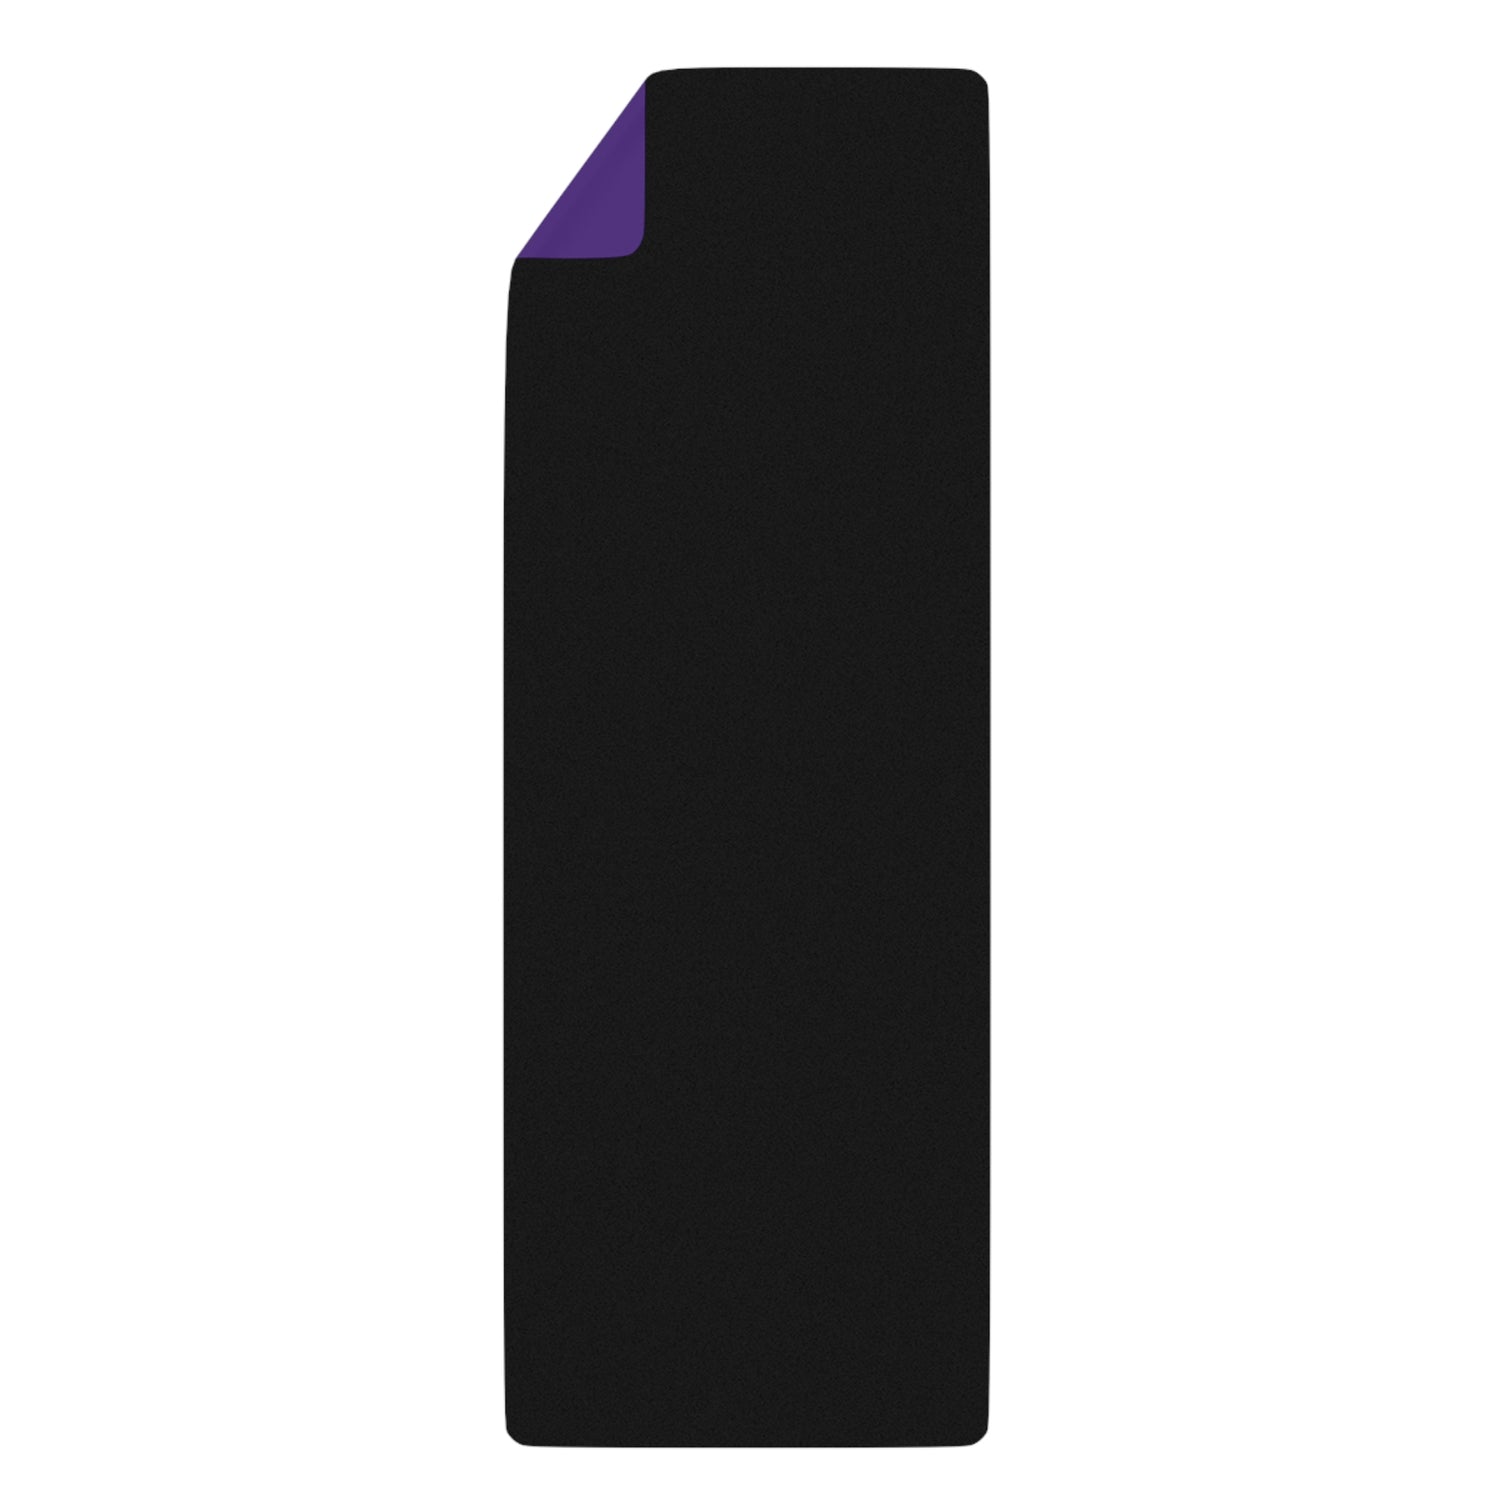 COUNTING BLESSINGS ALL DAY EVERYDAY!!! - Rubber Yoga Mat - Purple